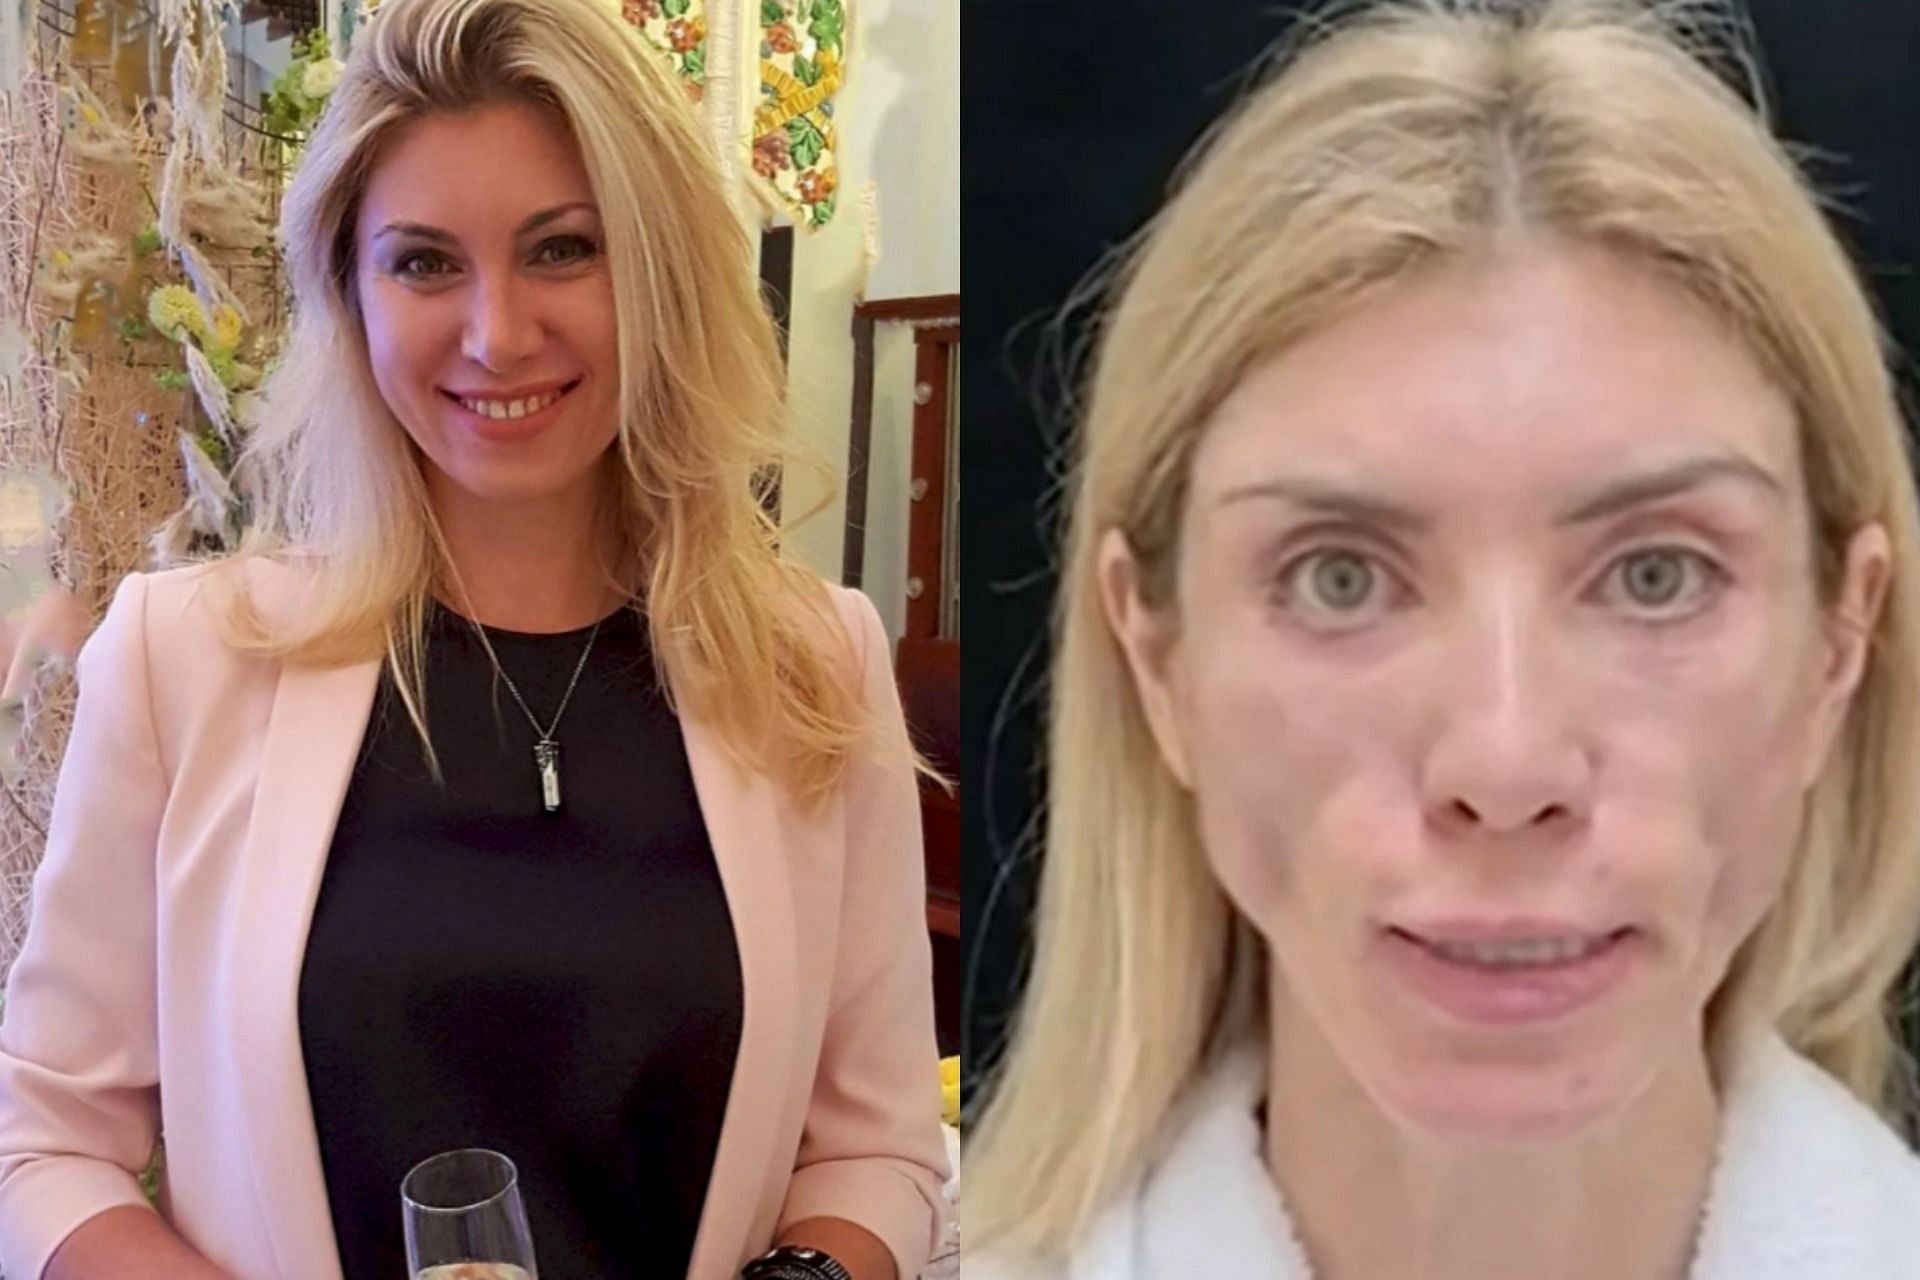 Russian beauty queen to sue plastic surgeons following botched surgery (Image via East2West)